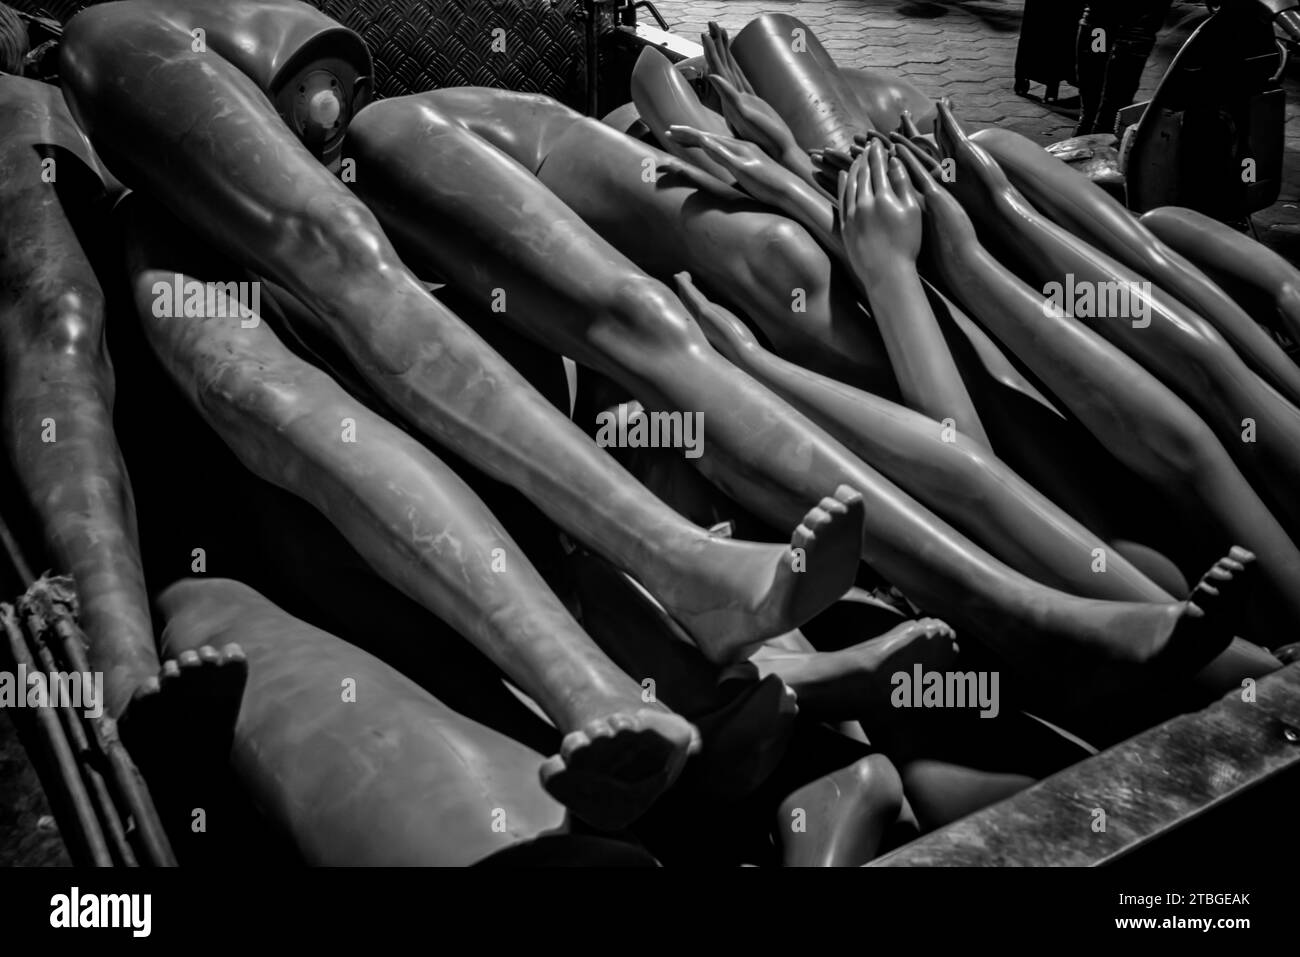 Pile of mannequin limbs, legs and arms at a Khan el-Khalili market stall, Cairo, Egypt Stock Photo